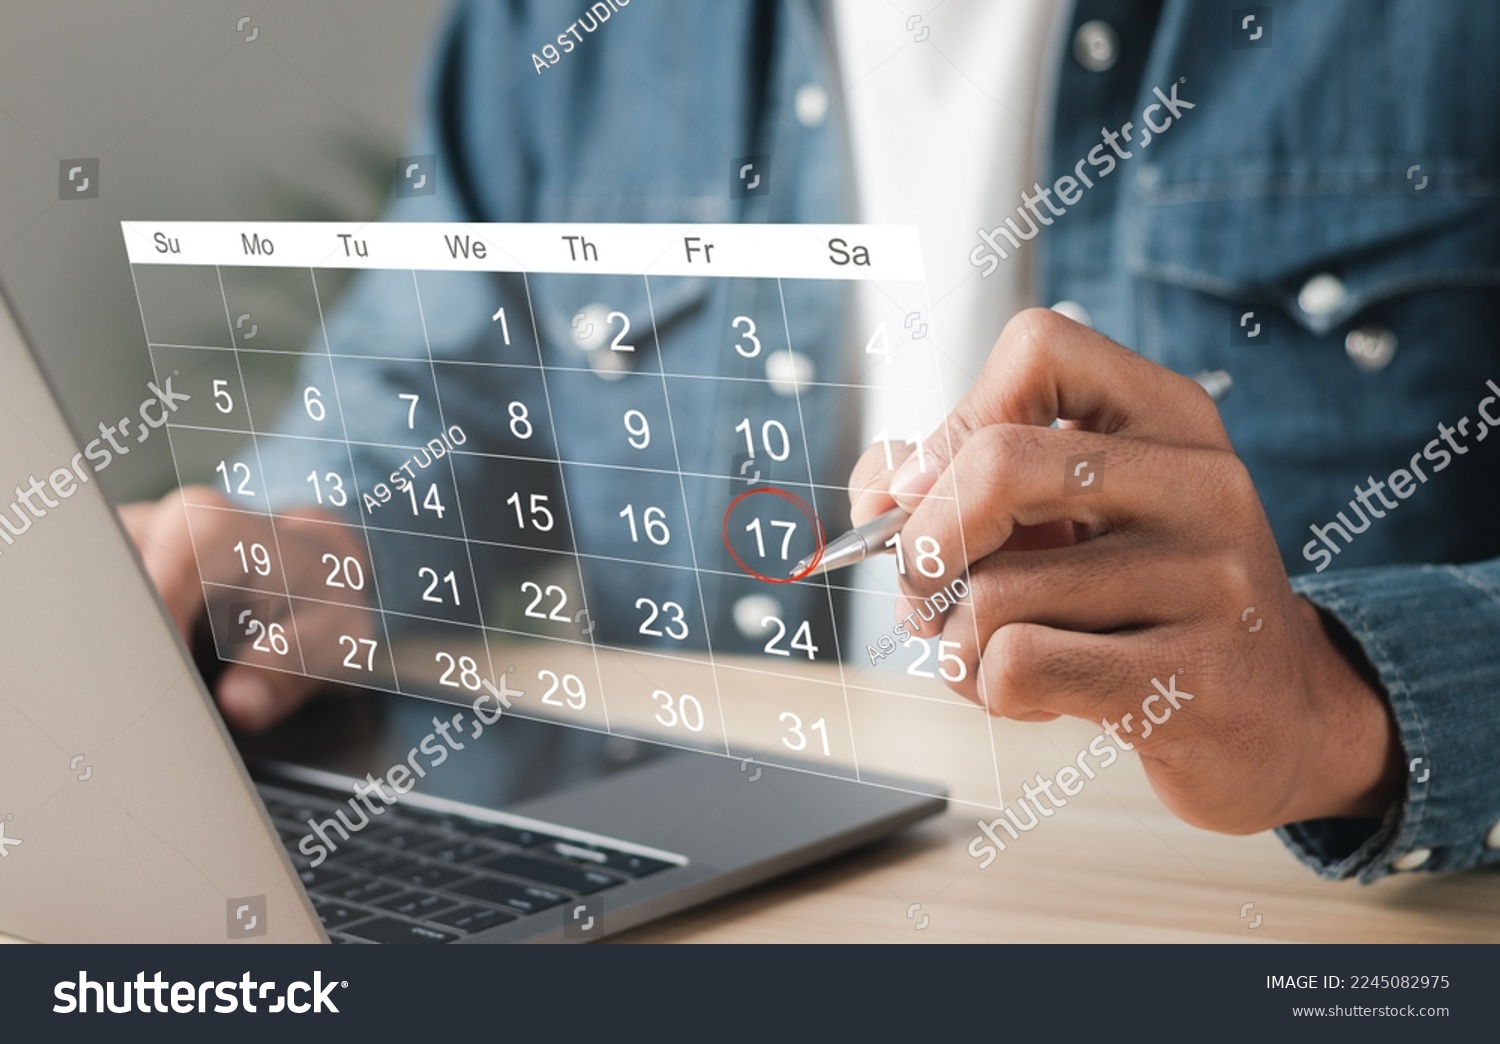 Businessman manages time for effective work. Calendar on the virtual screen interface. Highlight appointment reminders and meeting agenda on the calendar. Time management concept. #2245082975